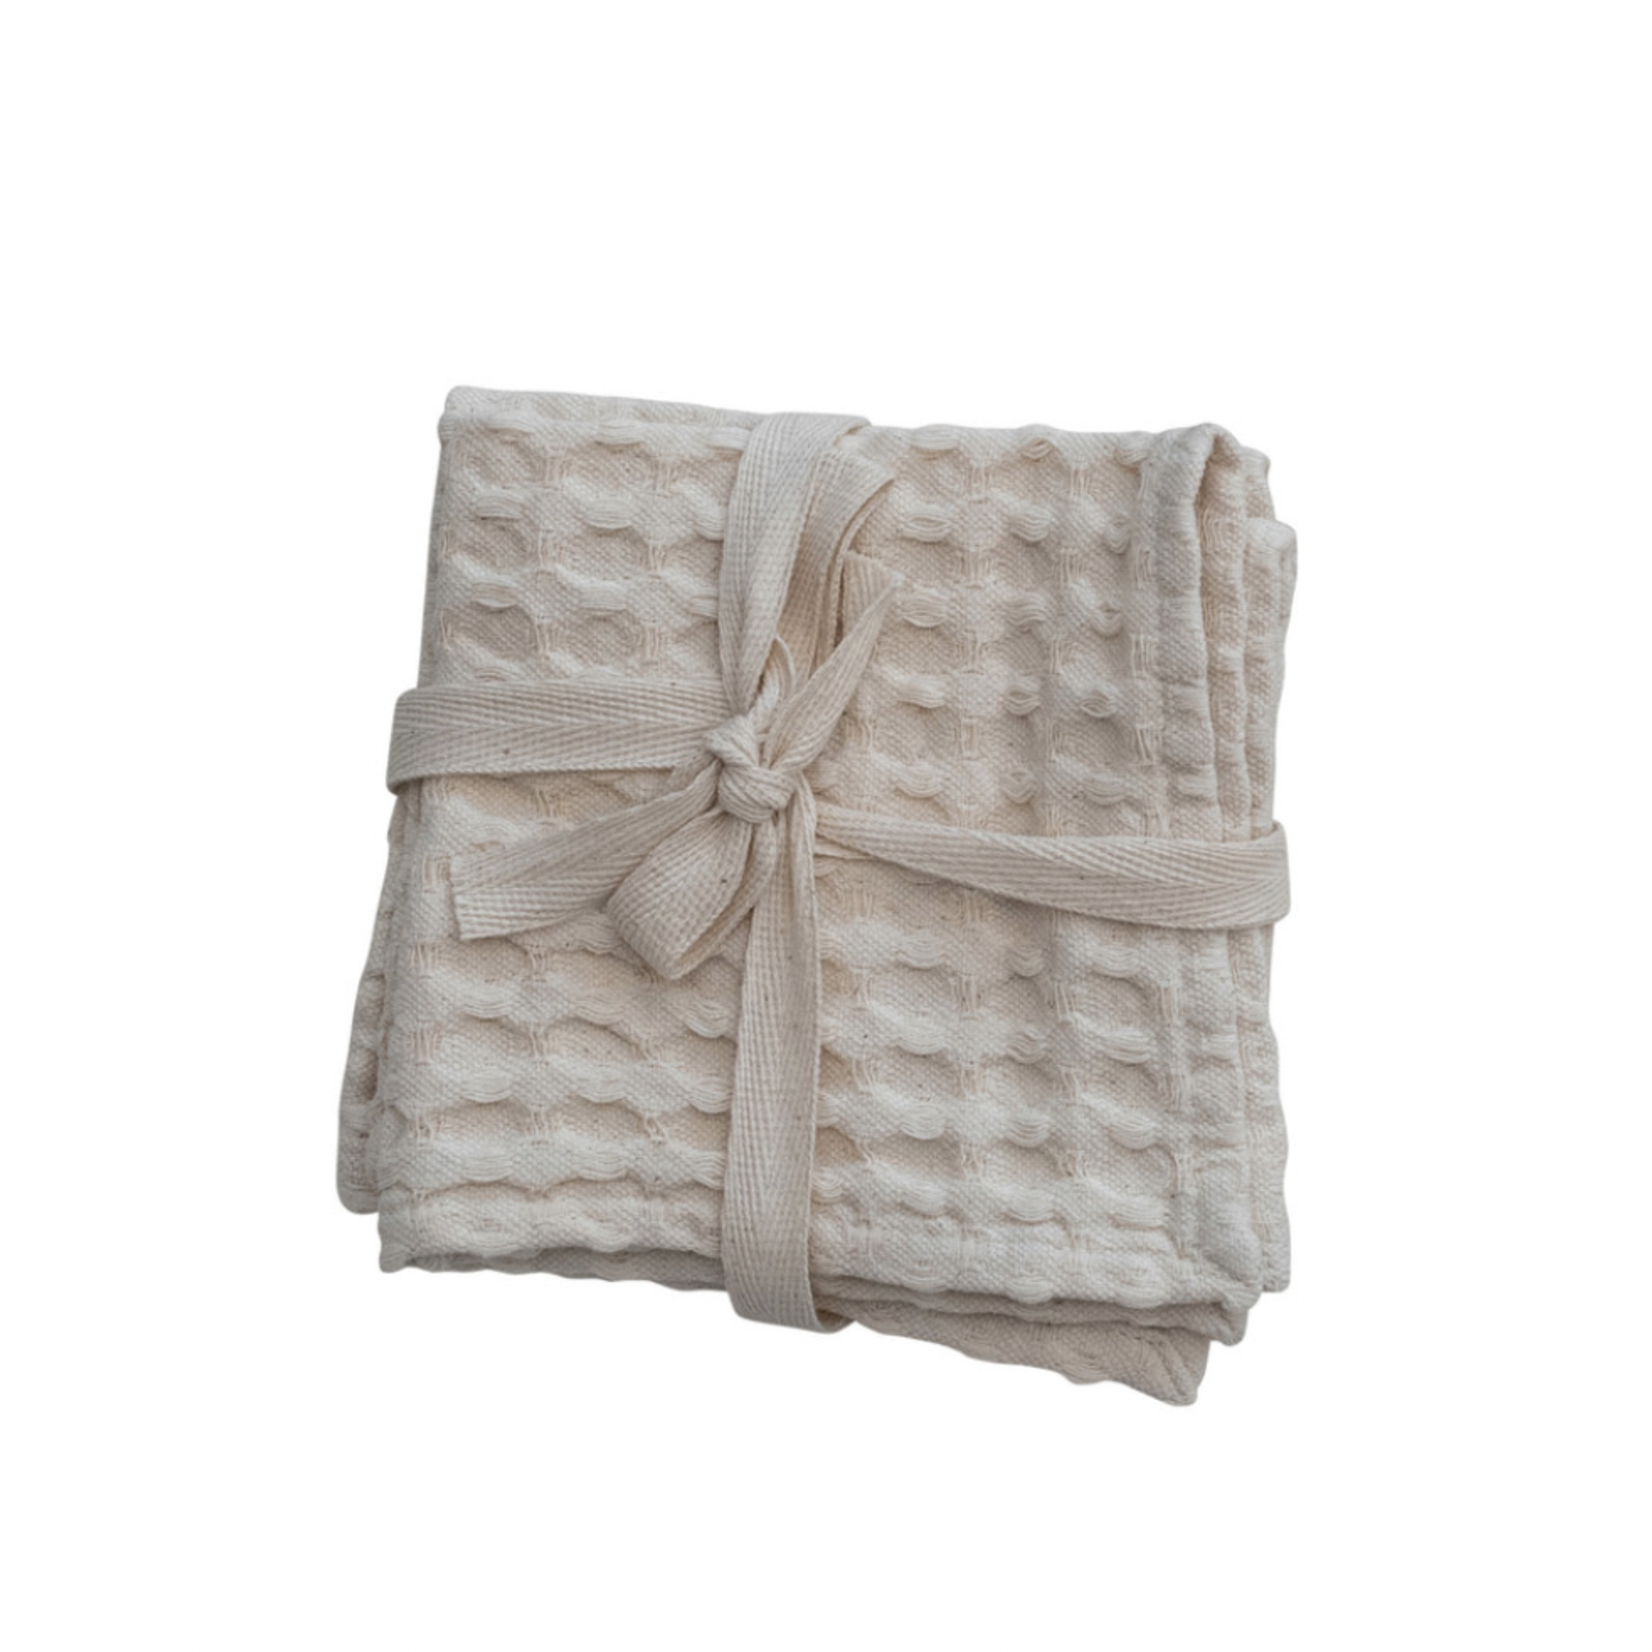 Cotton Waffle Weave Dish Cloth, set of 3 - The Good Tree